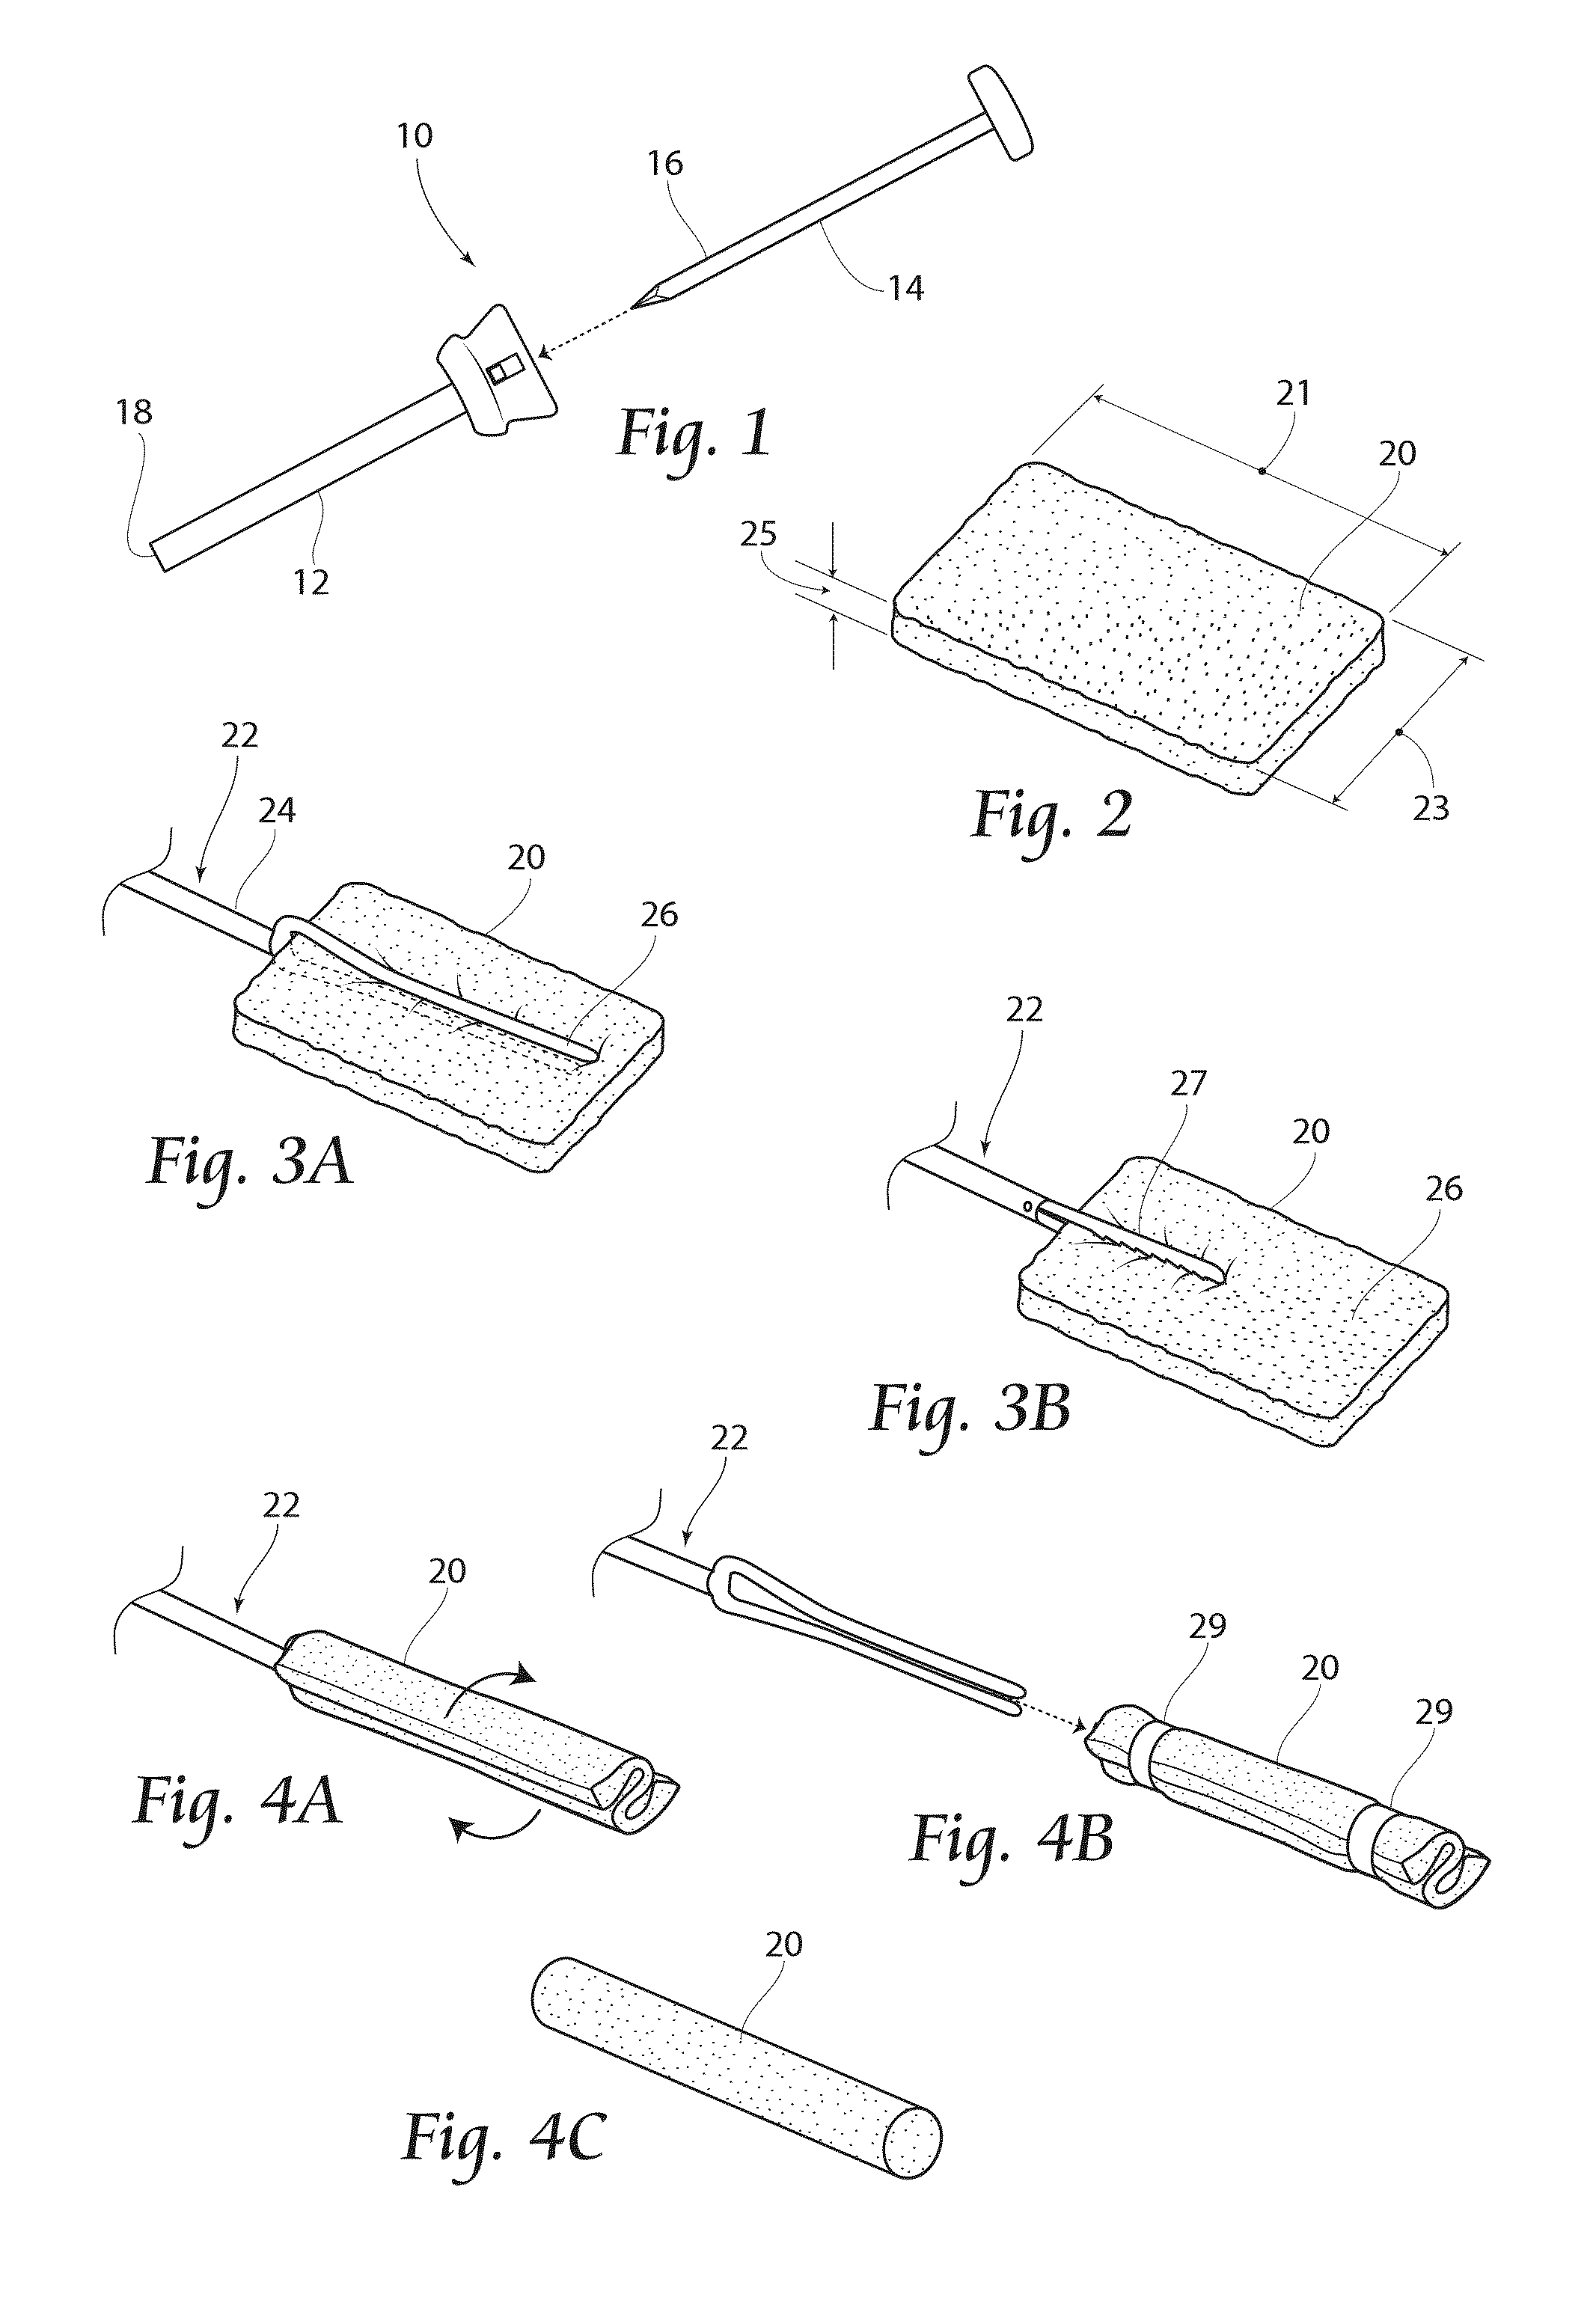 Minimally Invasive Endoscopic/Laparoscopic Highly Absorbent Surgical Devices, Methods and System